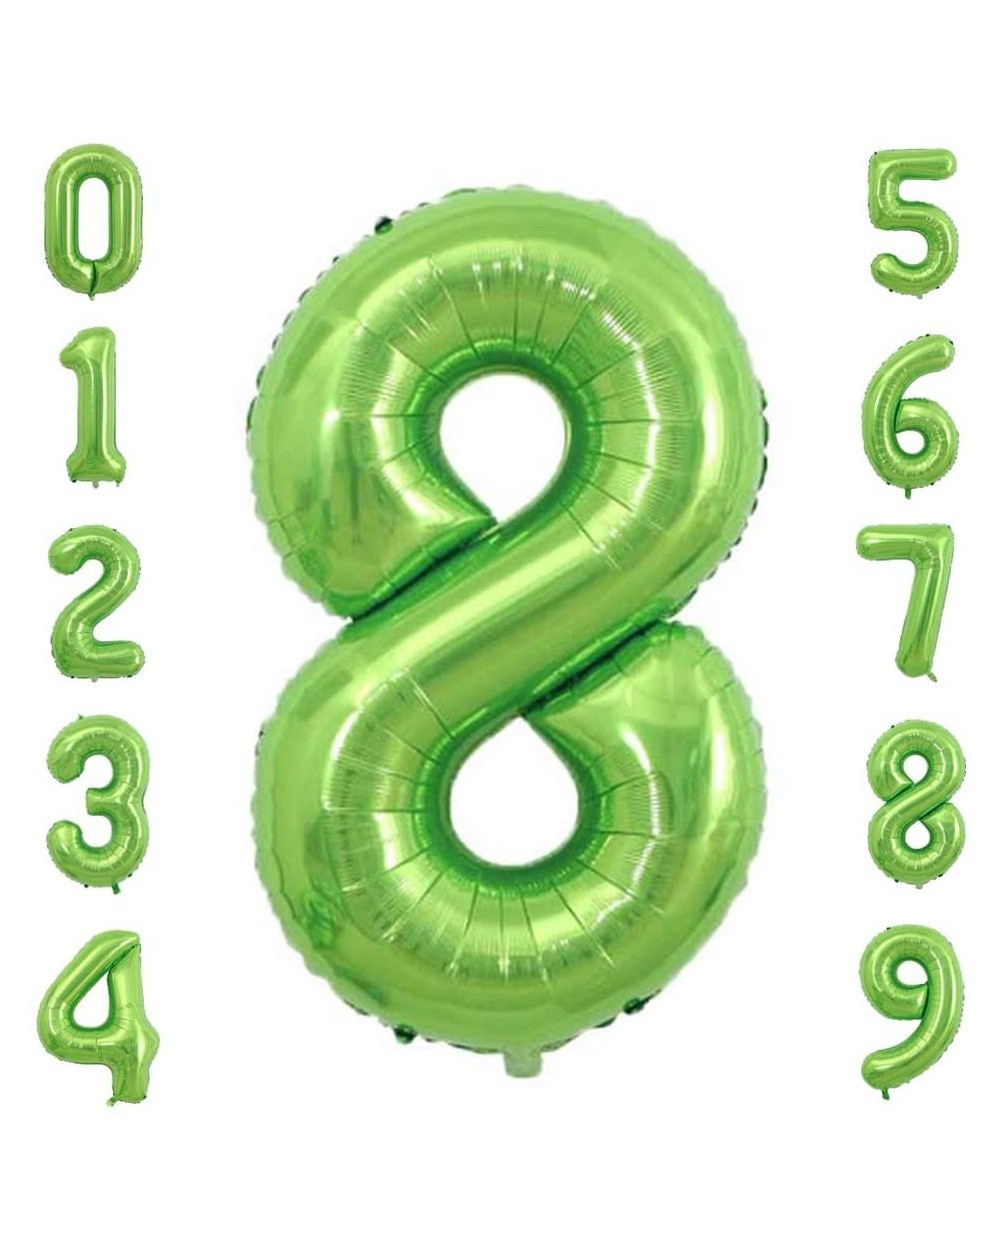 Balloons Big Number 8 Balloon- Green Number Balloons for 8th Borthday Party Decorations Boy Girl Kids- 40 Inch - Green 8 - C1...